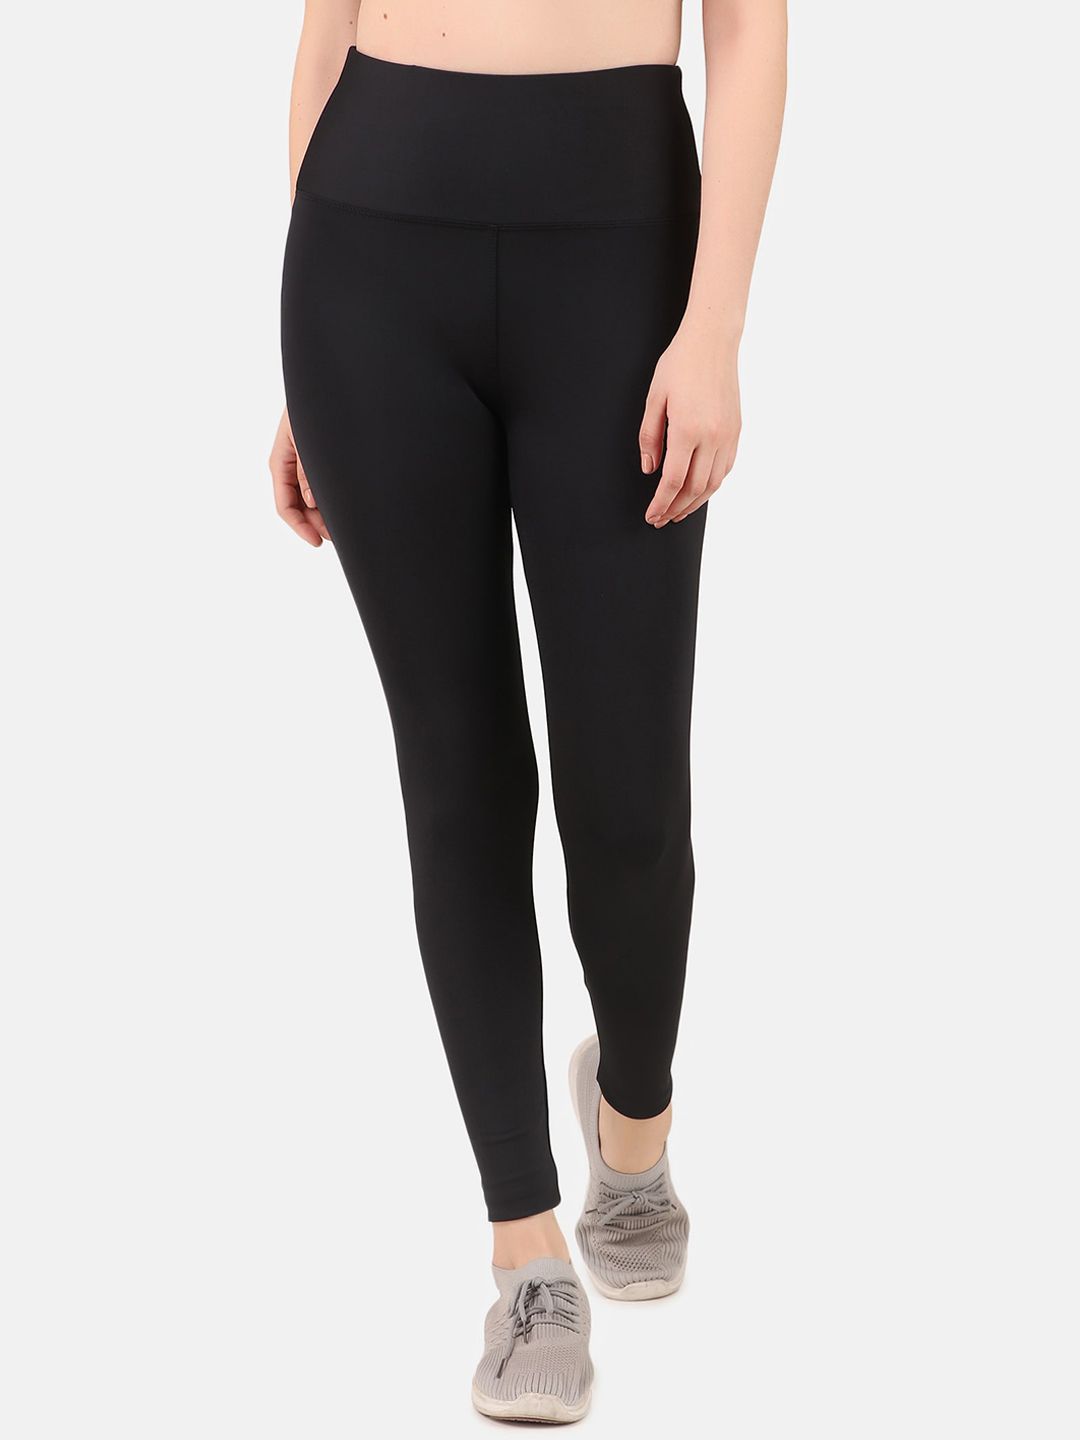 FITINC Women Black Solid Tights Price in India